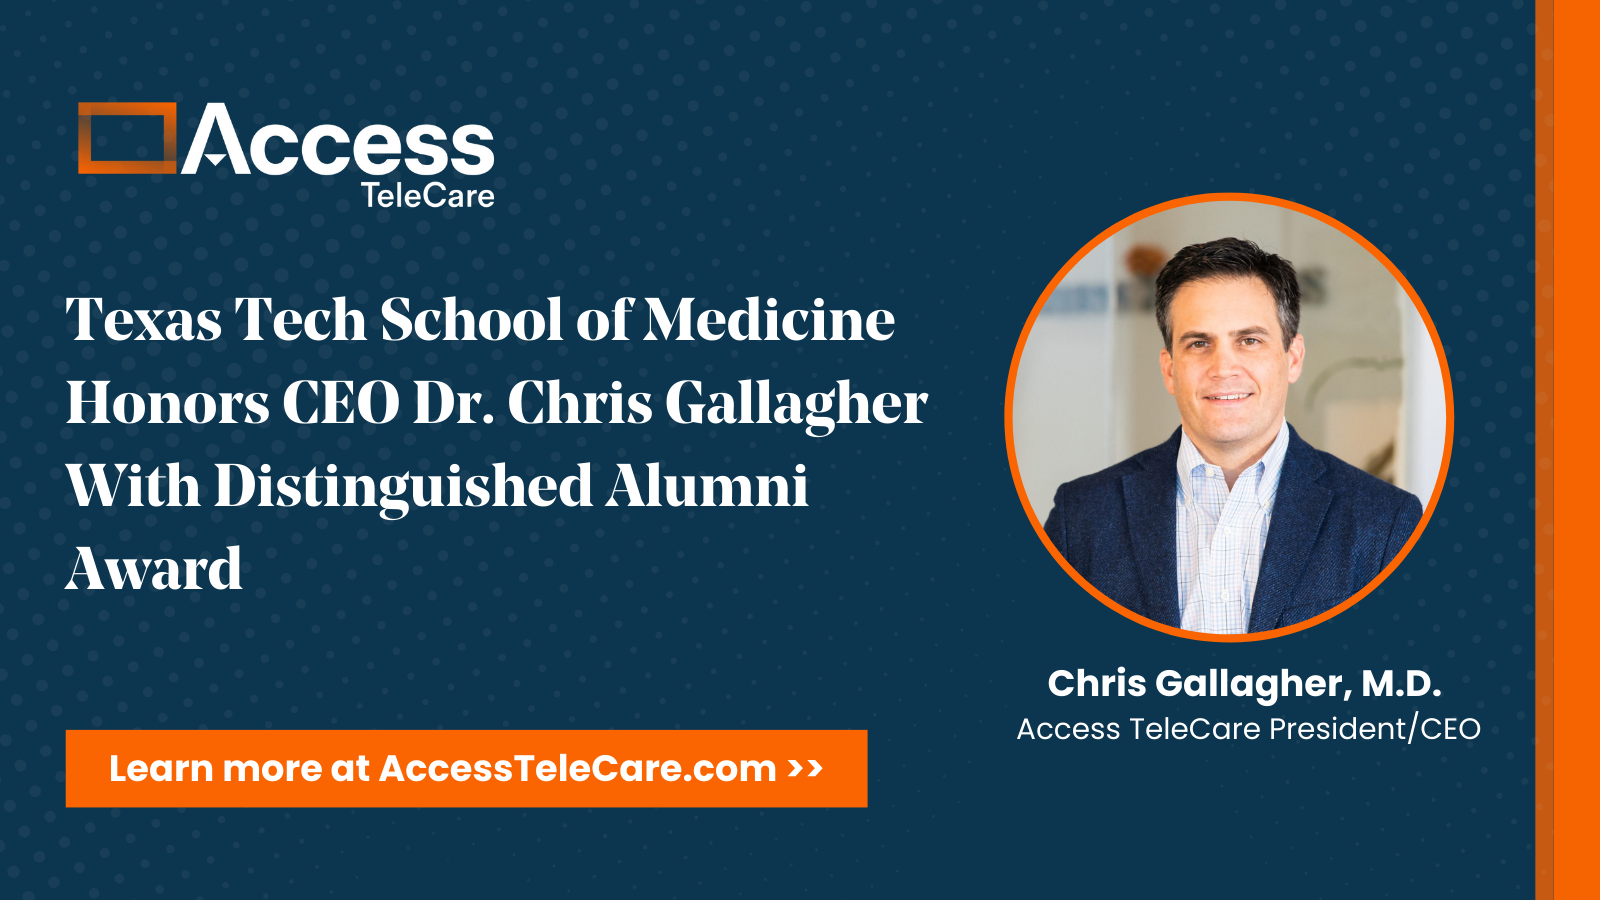 Texas Tech School of Medicine honors Access TeleCare president/CEO Dr. Chris Gallagher with Distinguished Alumni Award